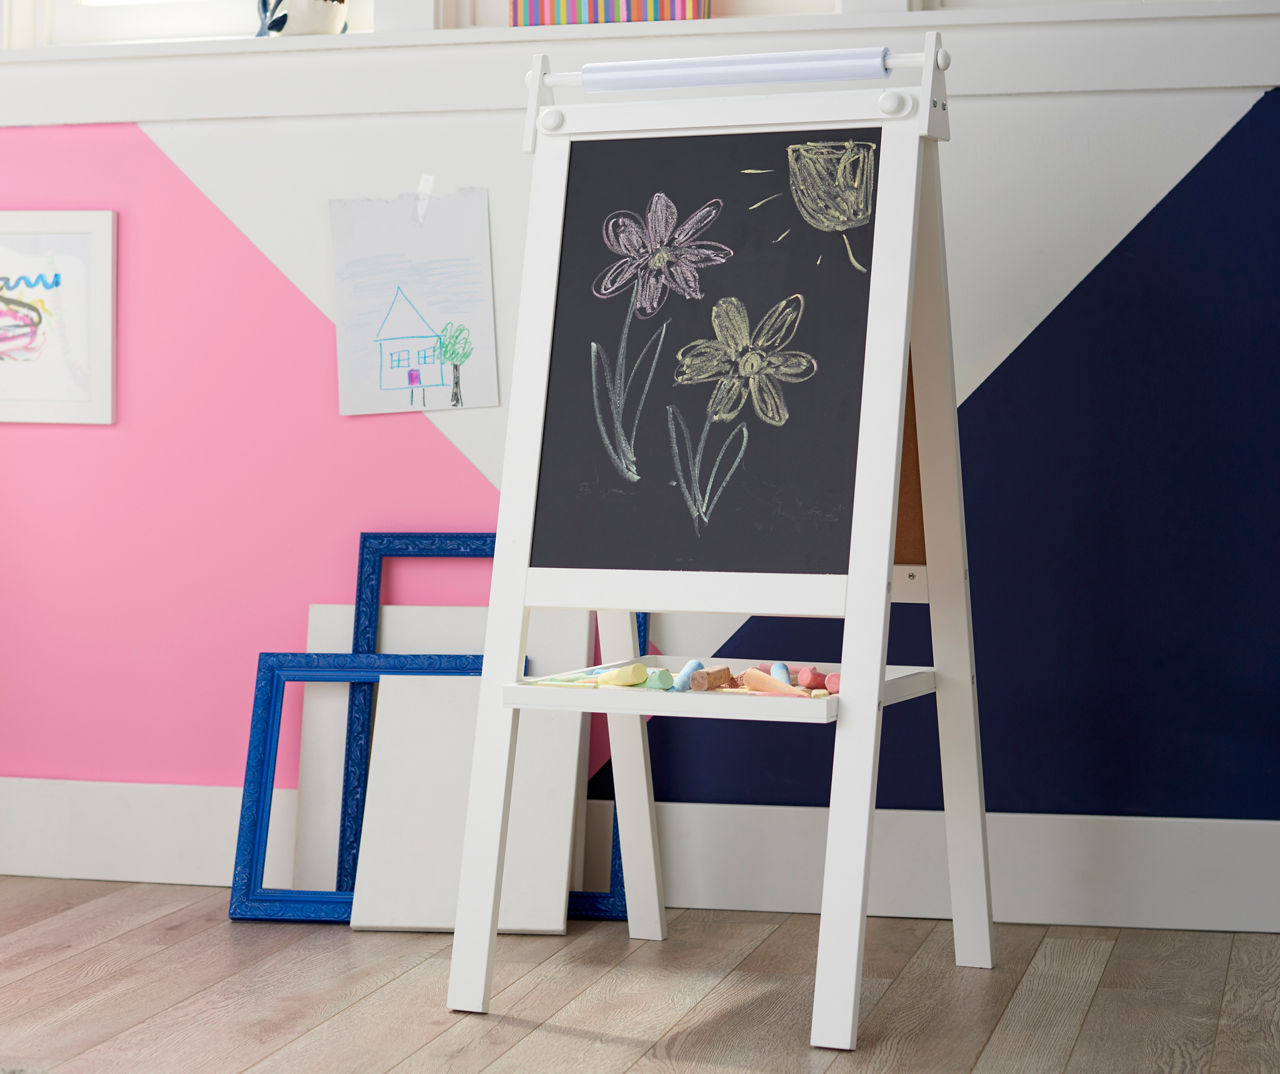 Art Easel with paper roll